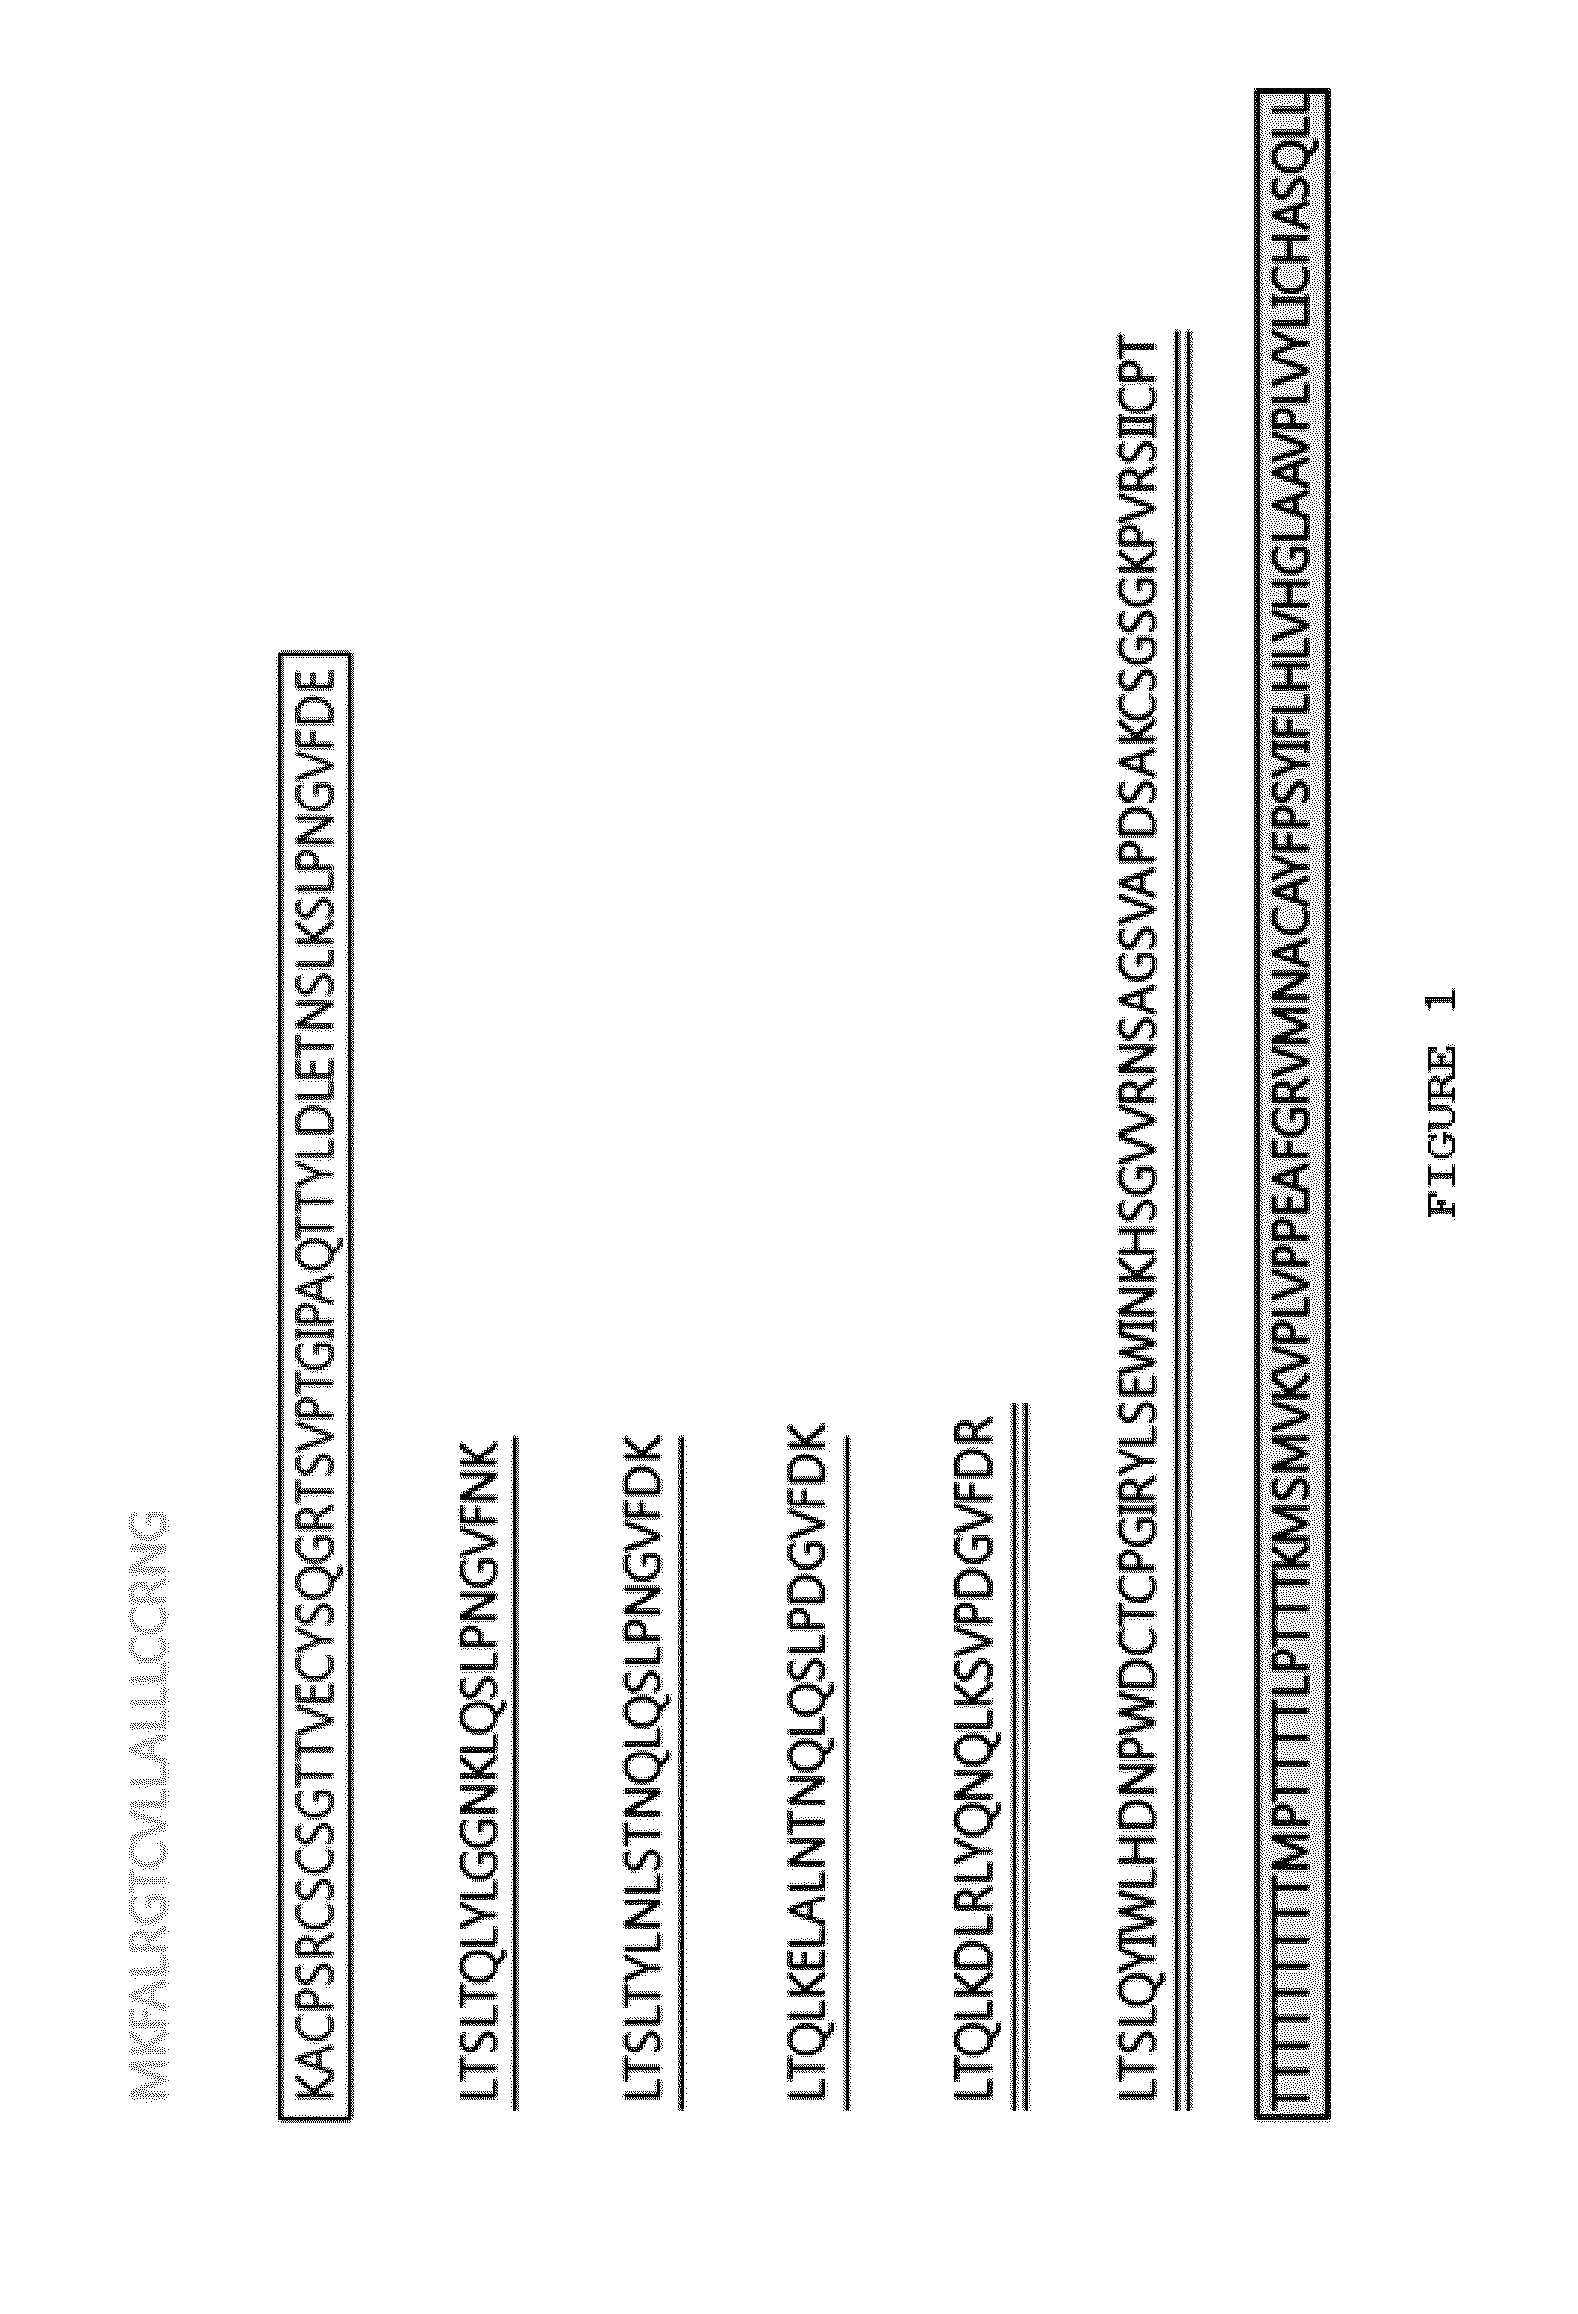 Water-Soluble Polypeptides Comprised of Repeat Modules, Method for Preparing the Same and Method for a Target-Specific Polypeptide and Analysis of Biological Activity Thereof